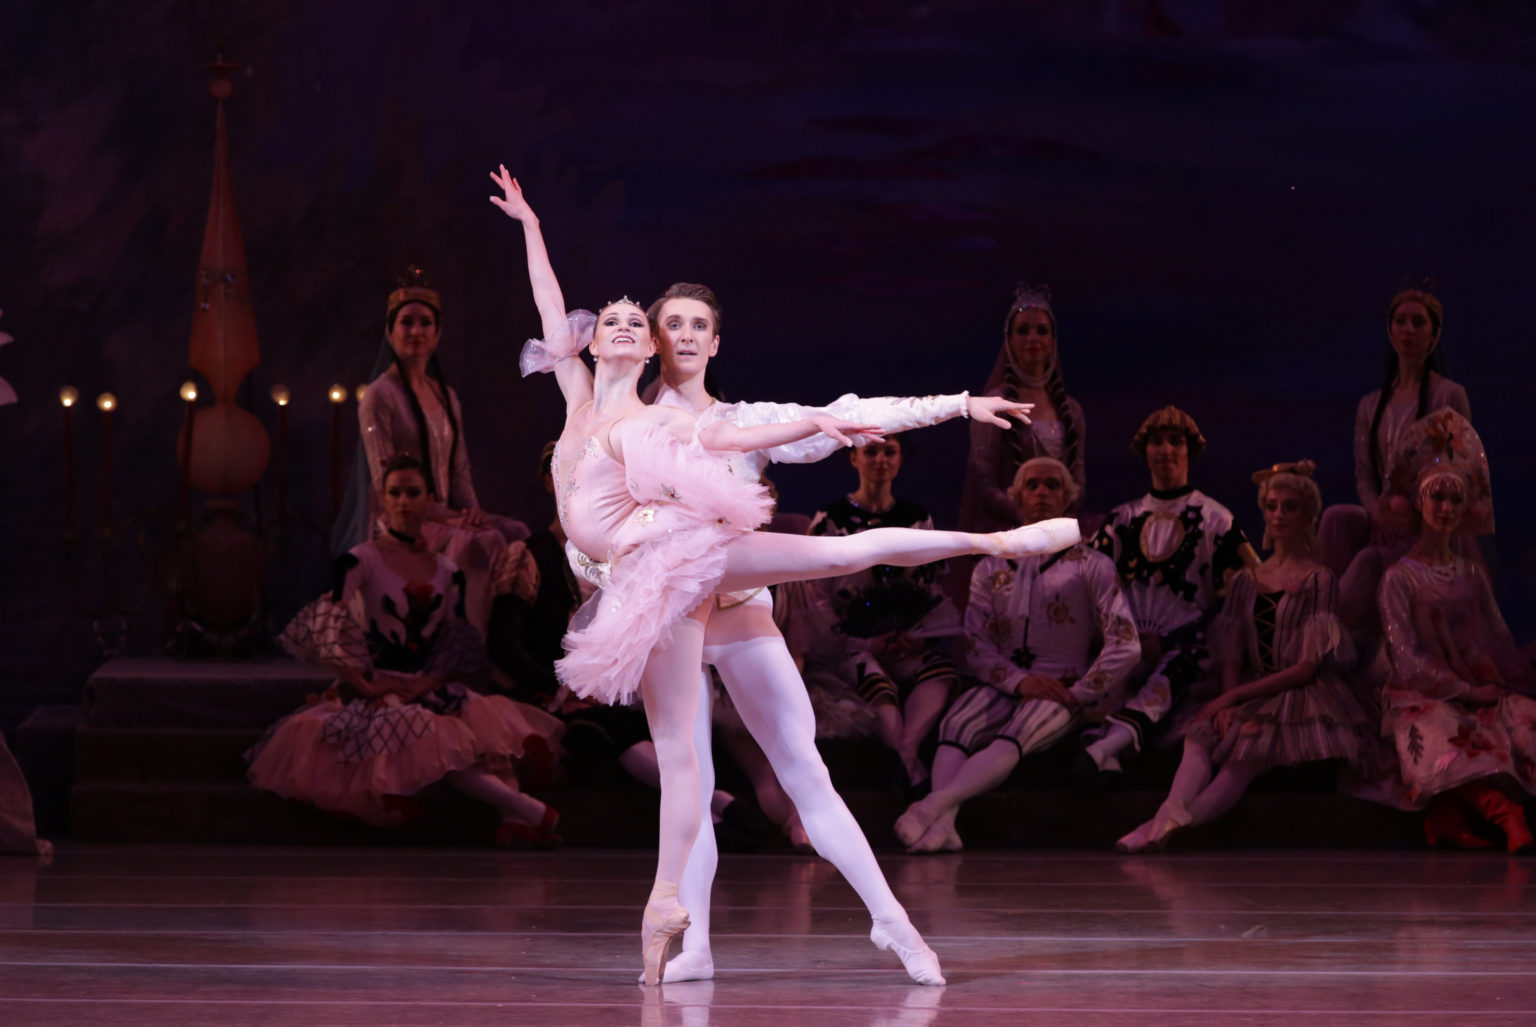 Astana Ballet to Present “The Nutcracker” with Soloists from Mariinsky ...